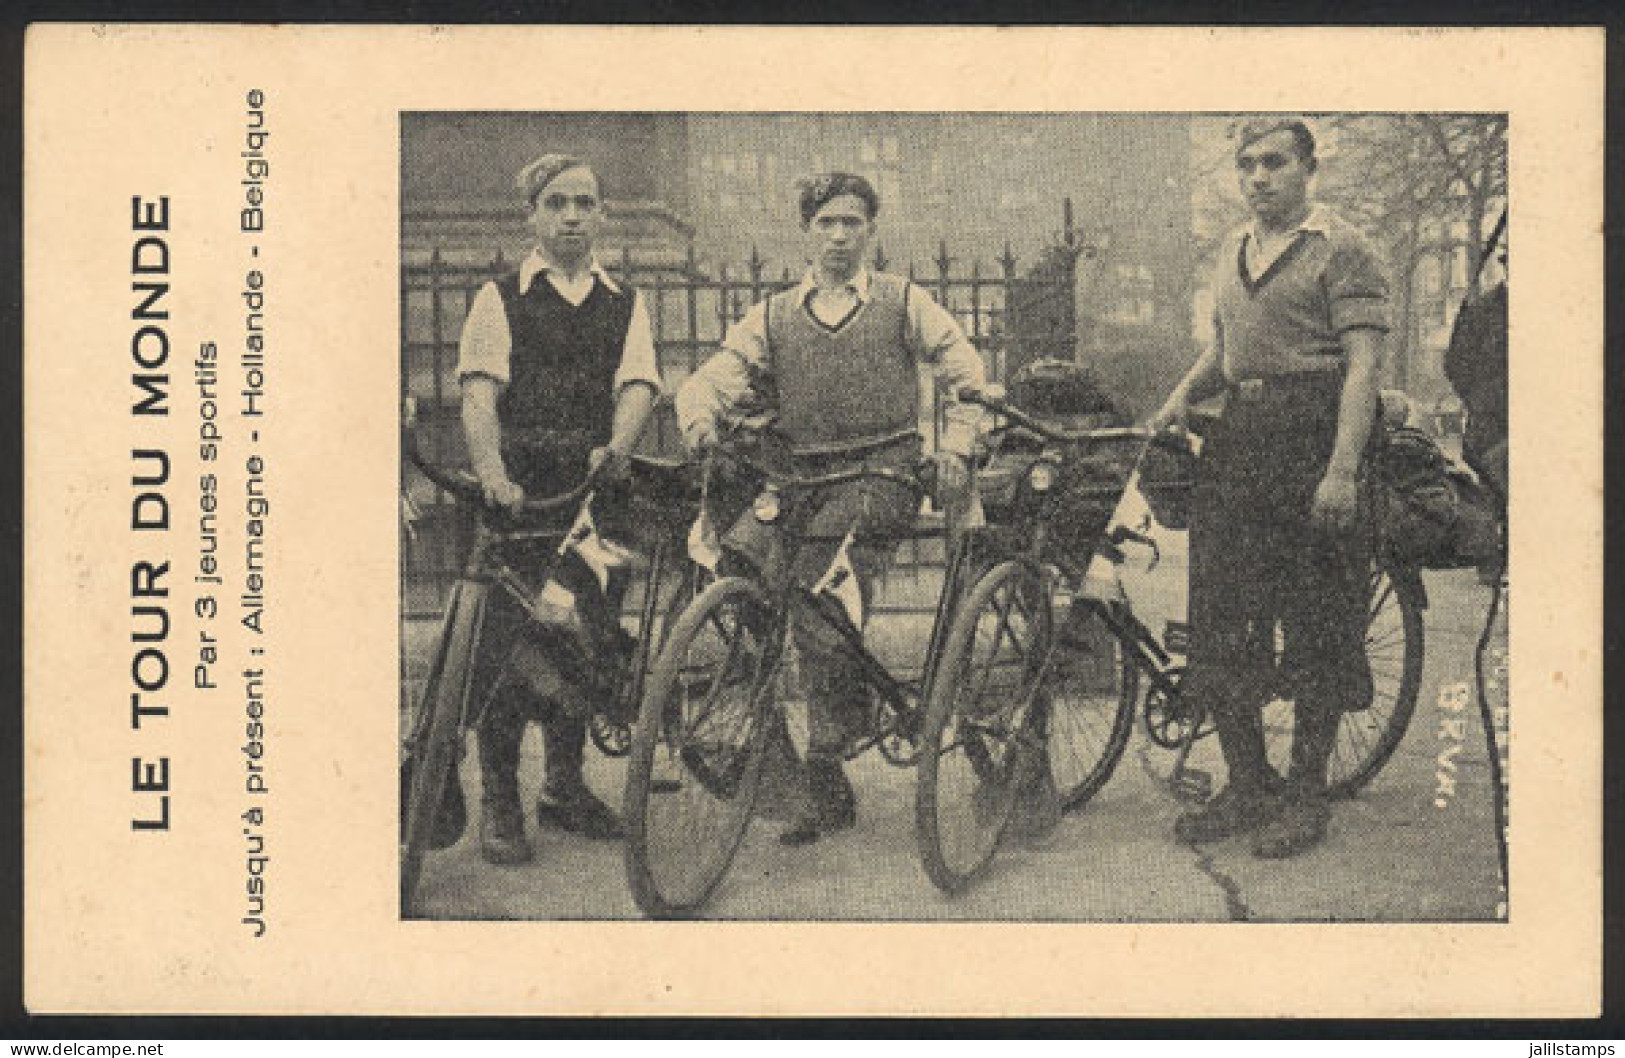 TOPIC SPORTS: CYCLING Around The World, Old Unused Card With Photo Of The 3 Men From Germany, Netherlands And Belgium, V - Ciclismo